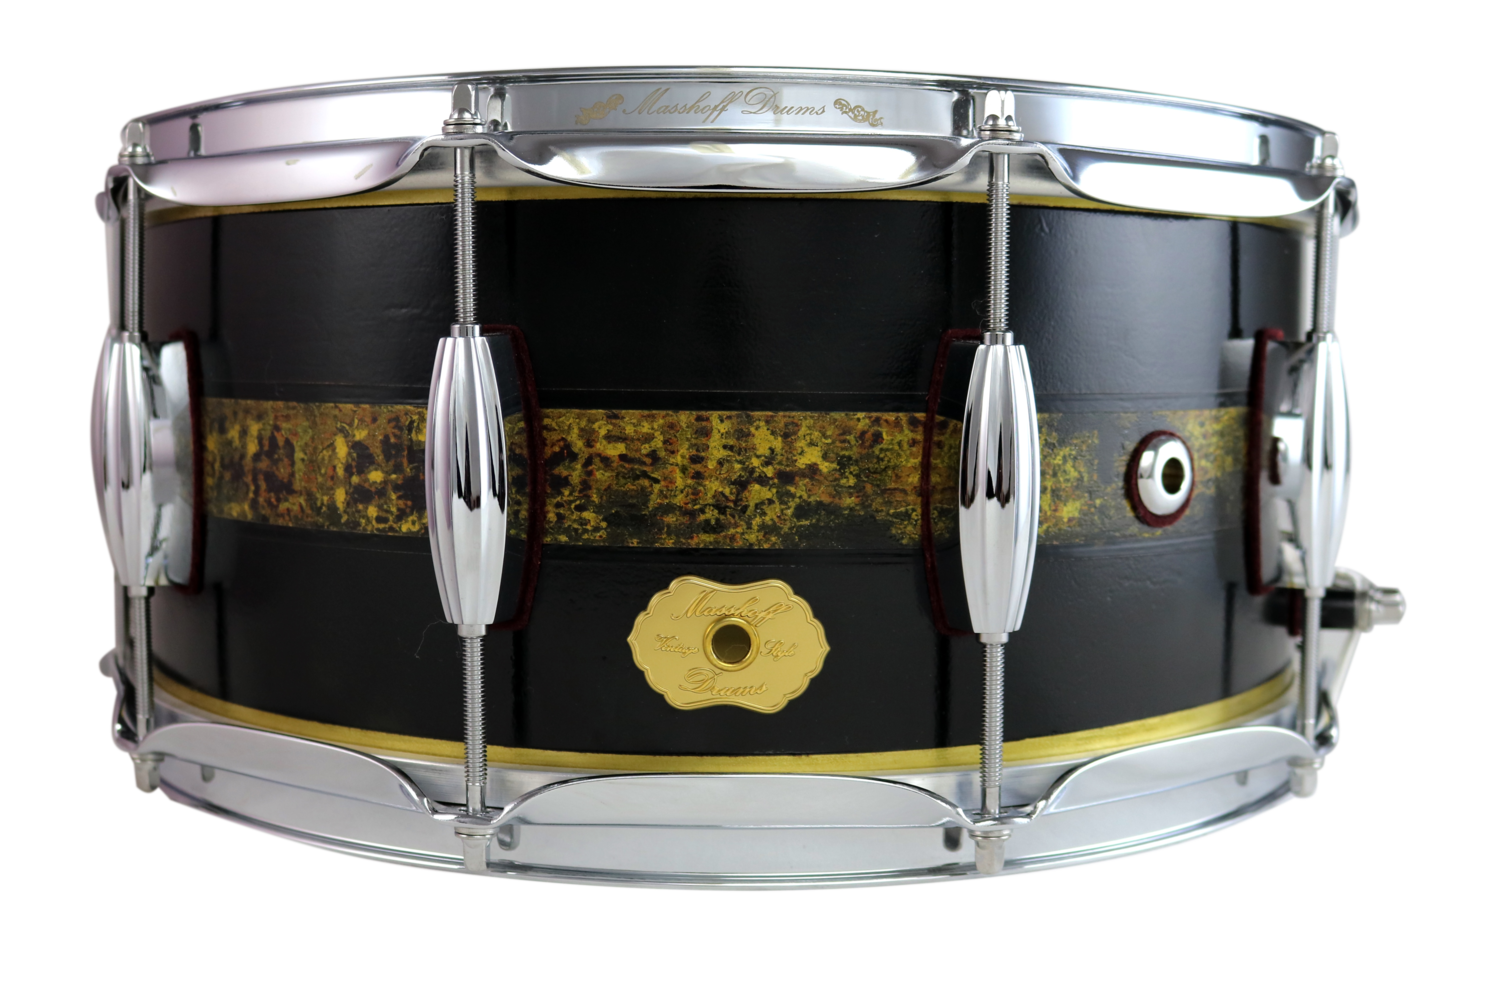 Z___Masshoff Drums 14"x 6.5" Messing Snare Drum "Avalon Brass / Duco King"